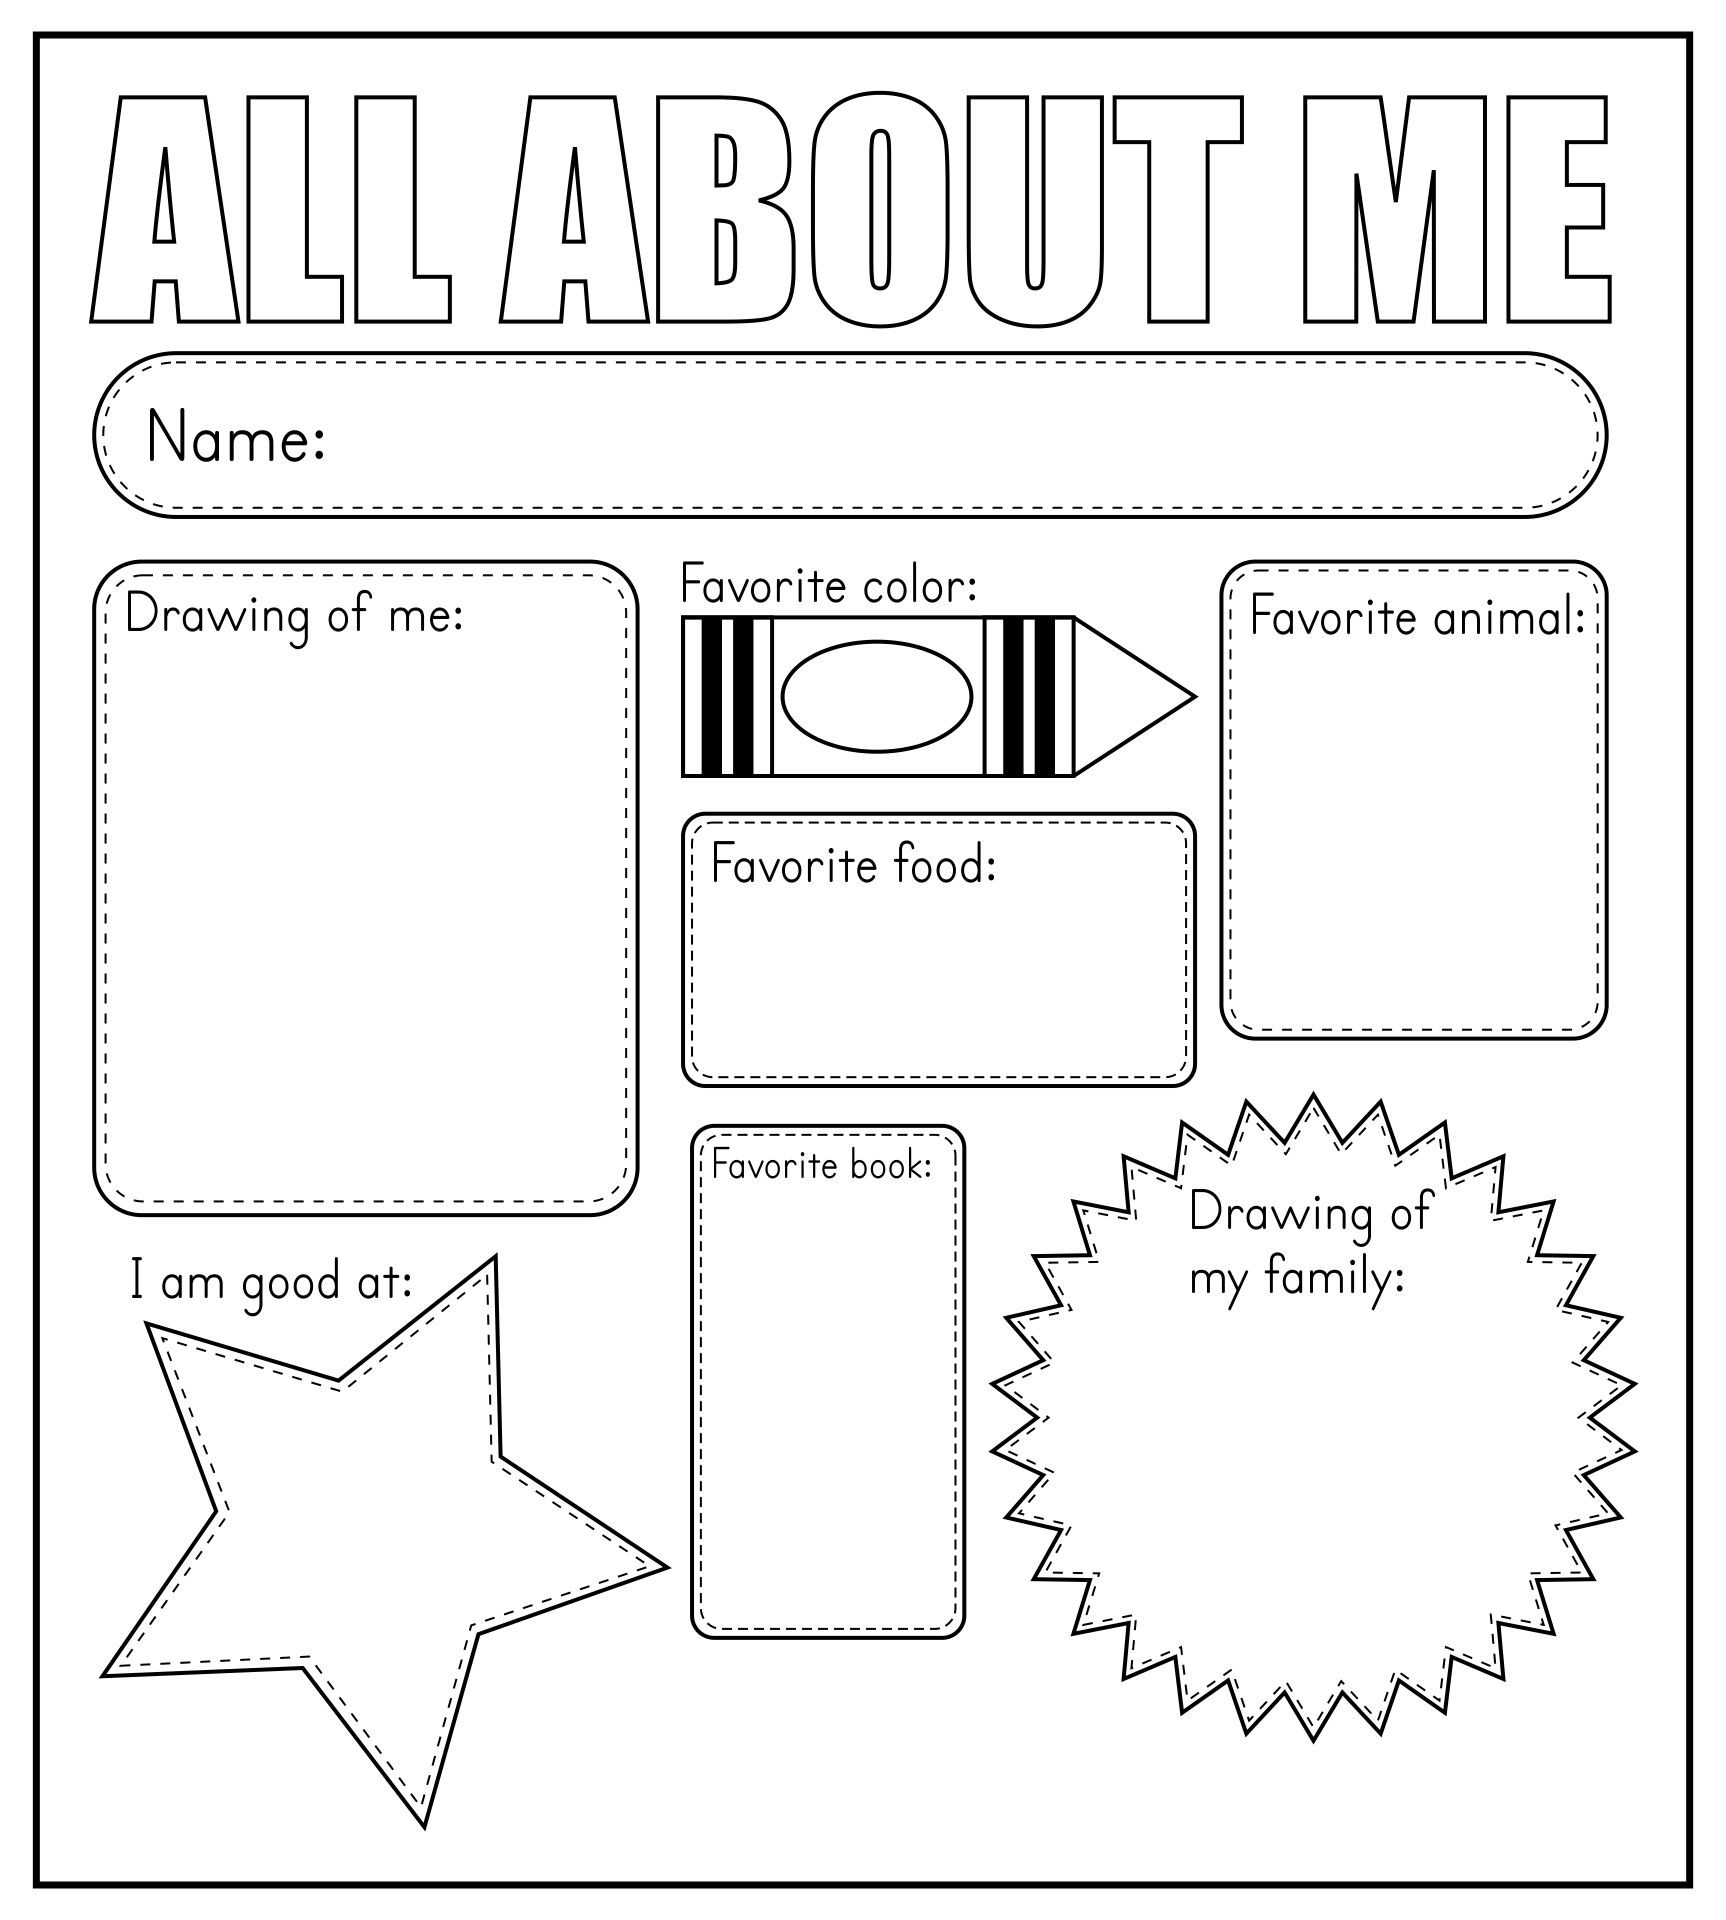 6 Best Images Of All About Me Printable Template All About Me 